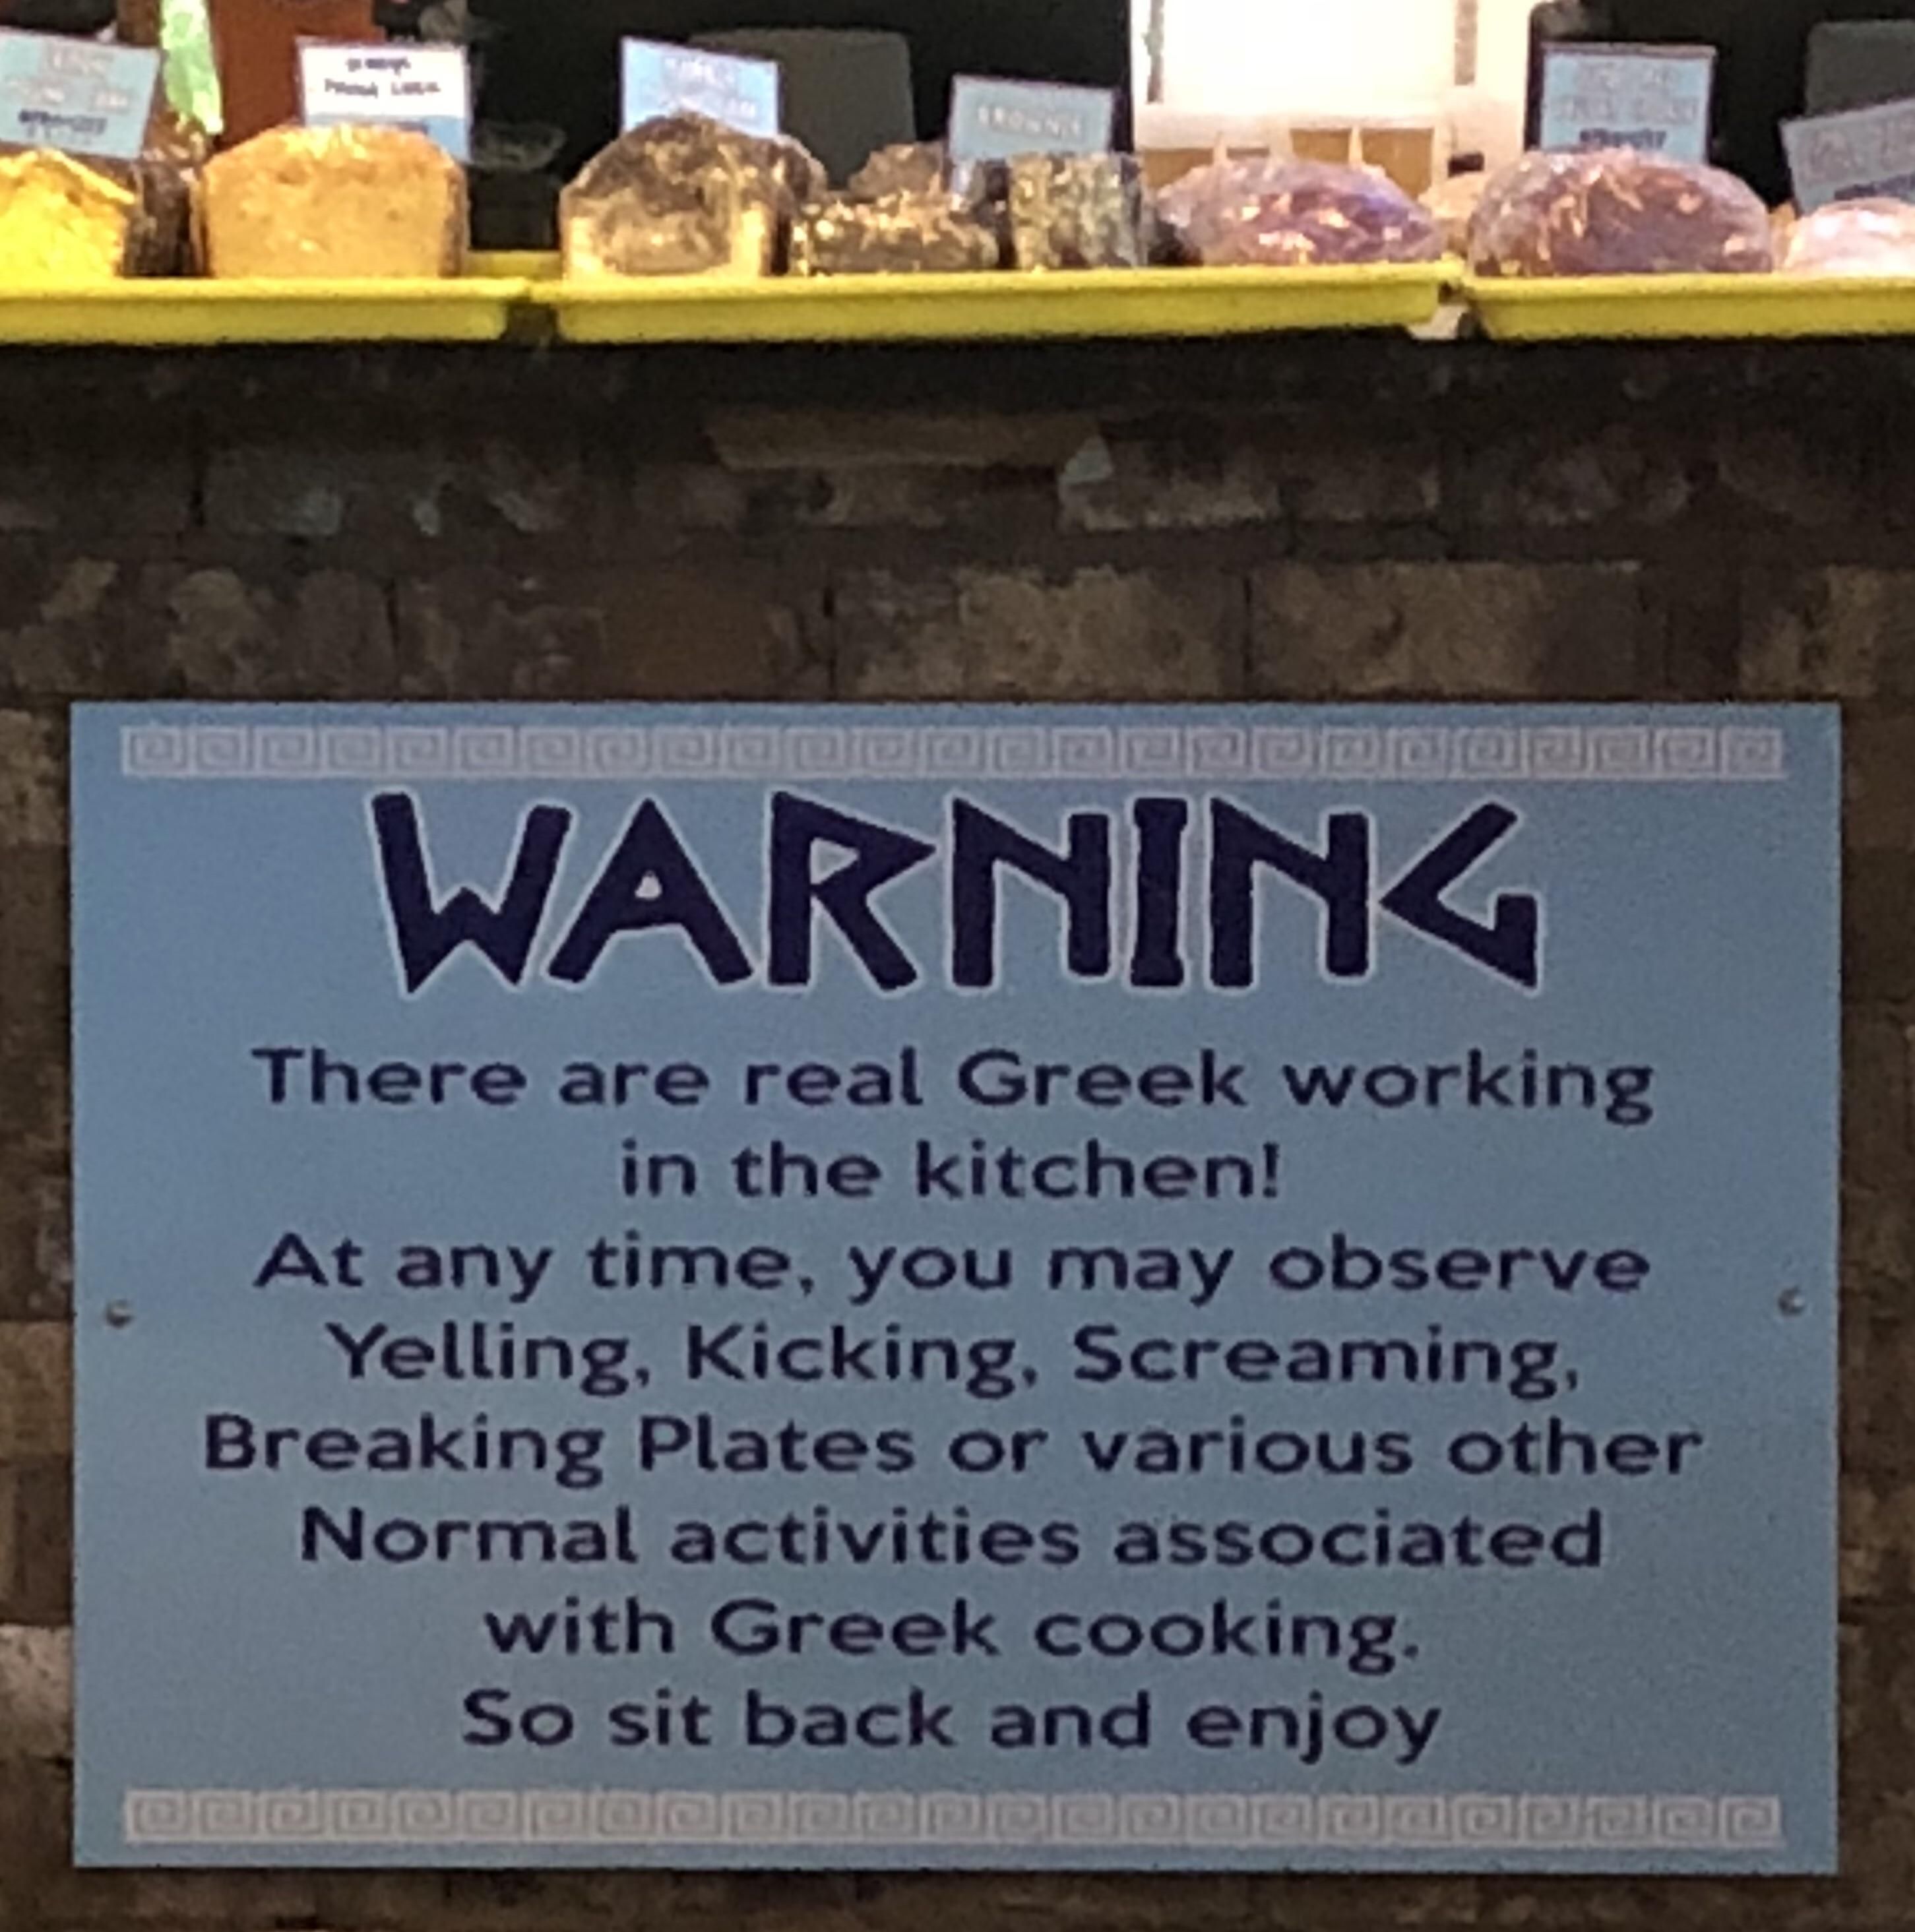 This warning sign at a local restaurant we visited.